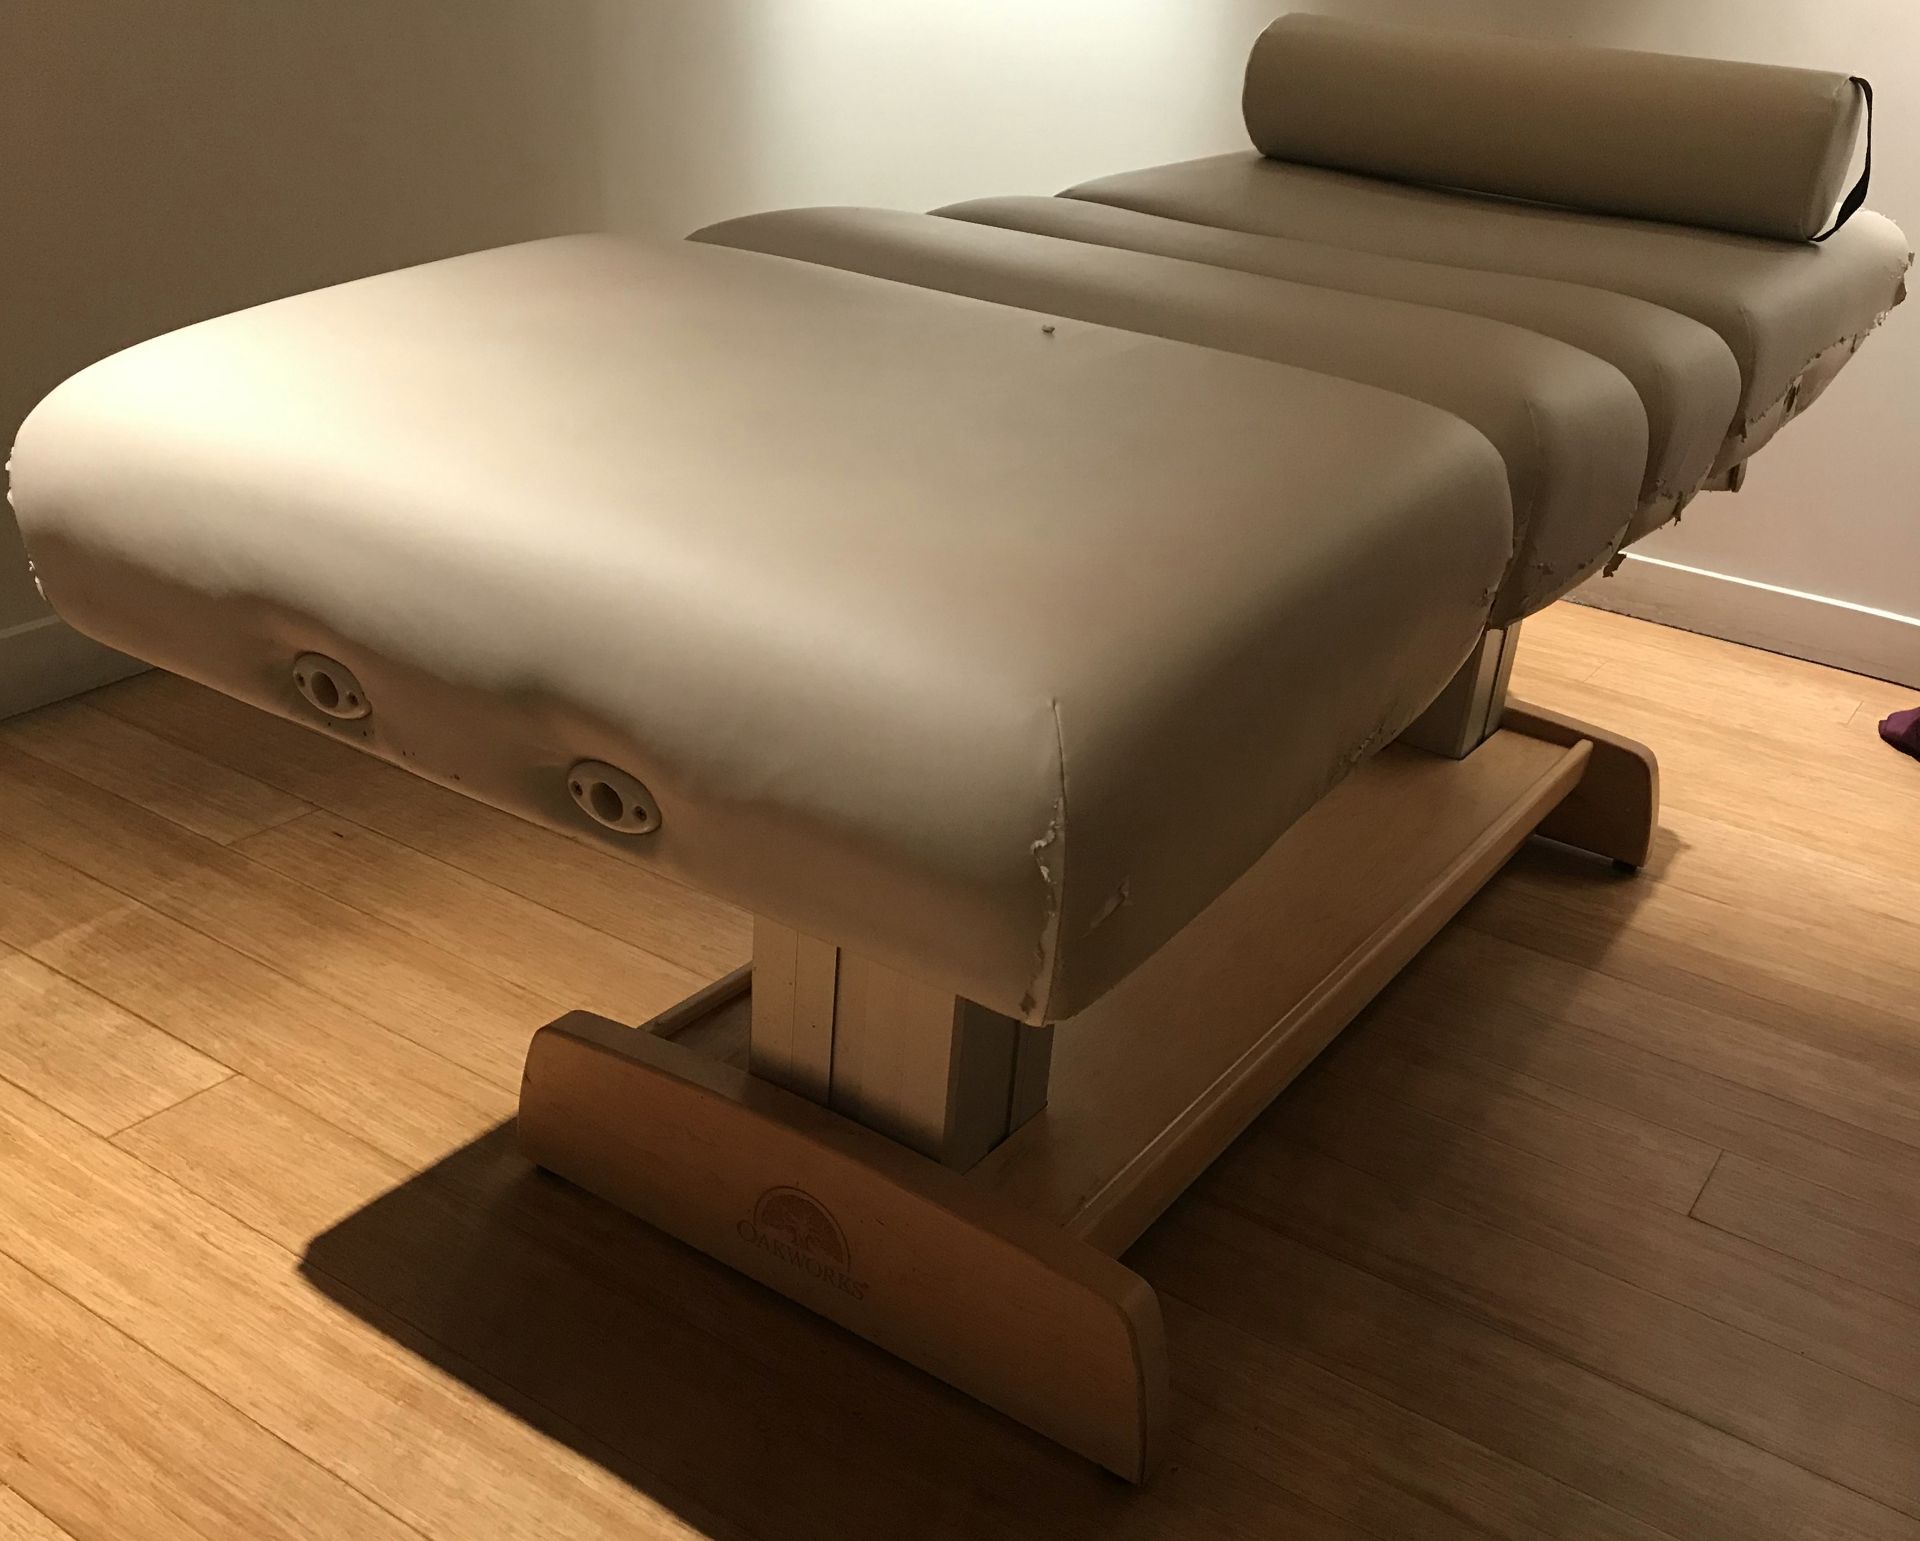 1 x Oakworks Clinician Electric-Hydraulic Massage Table With Footpedal and Linak HBWO Remote Control - Image 10 of 11